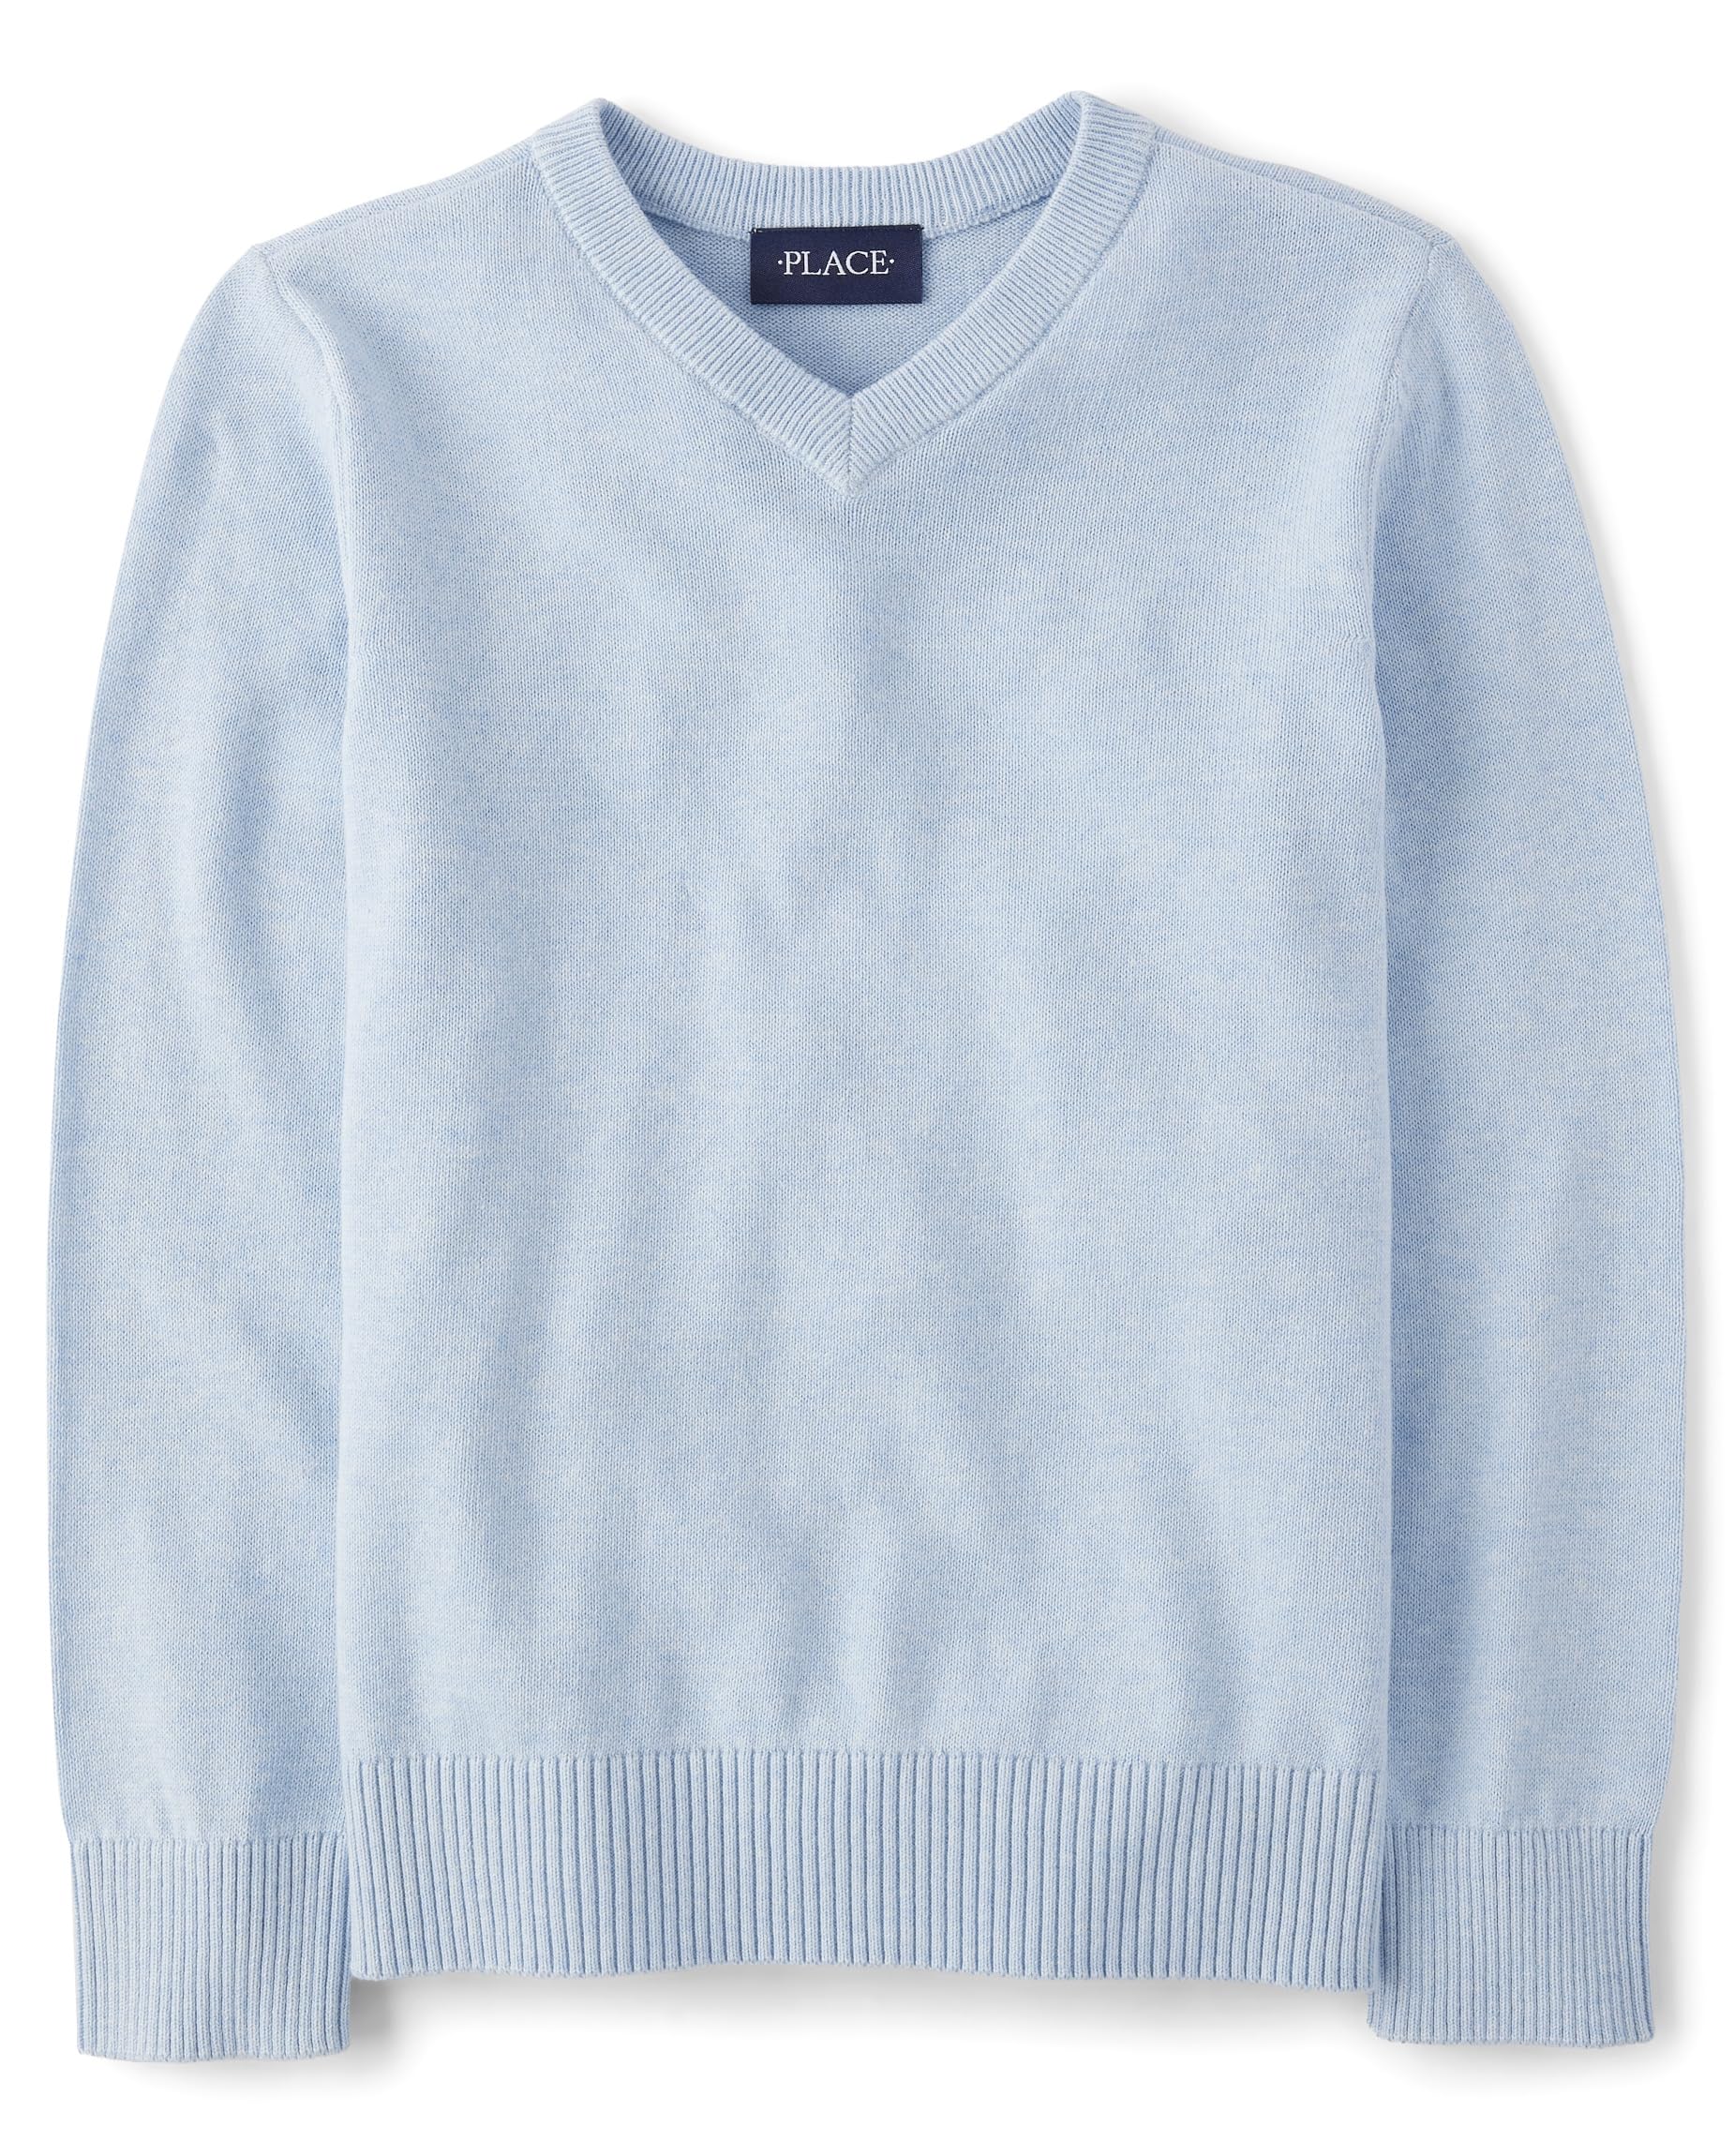 The Children's Place Boys' Long Sleeve V-Neck Sweater, Whirlwind Blue, Large